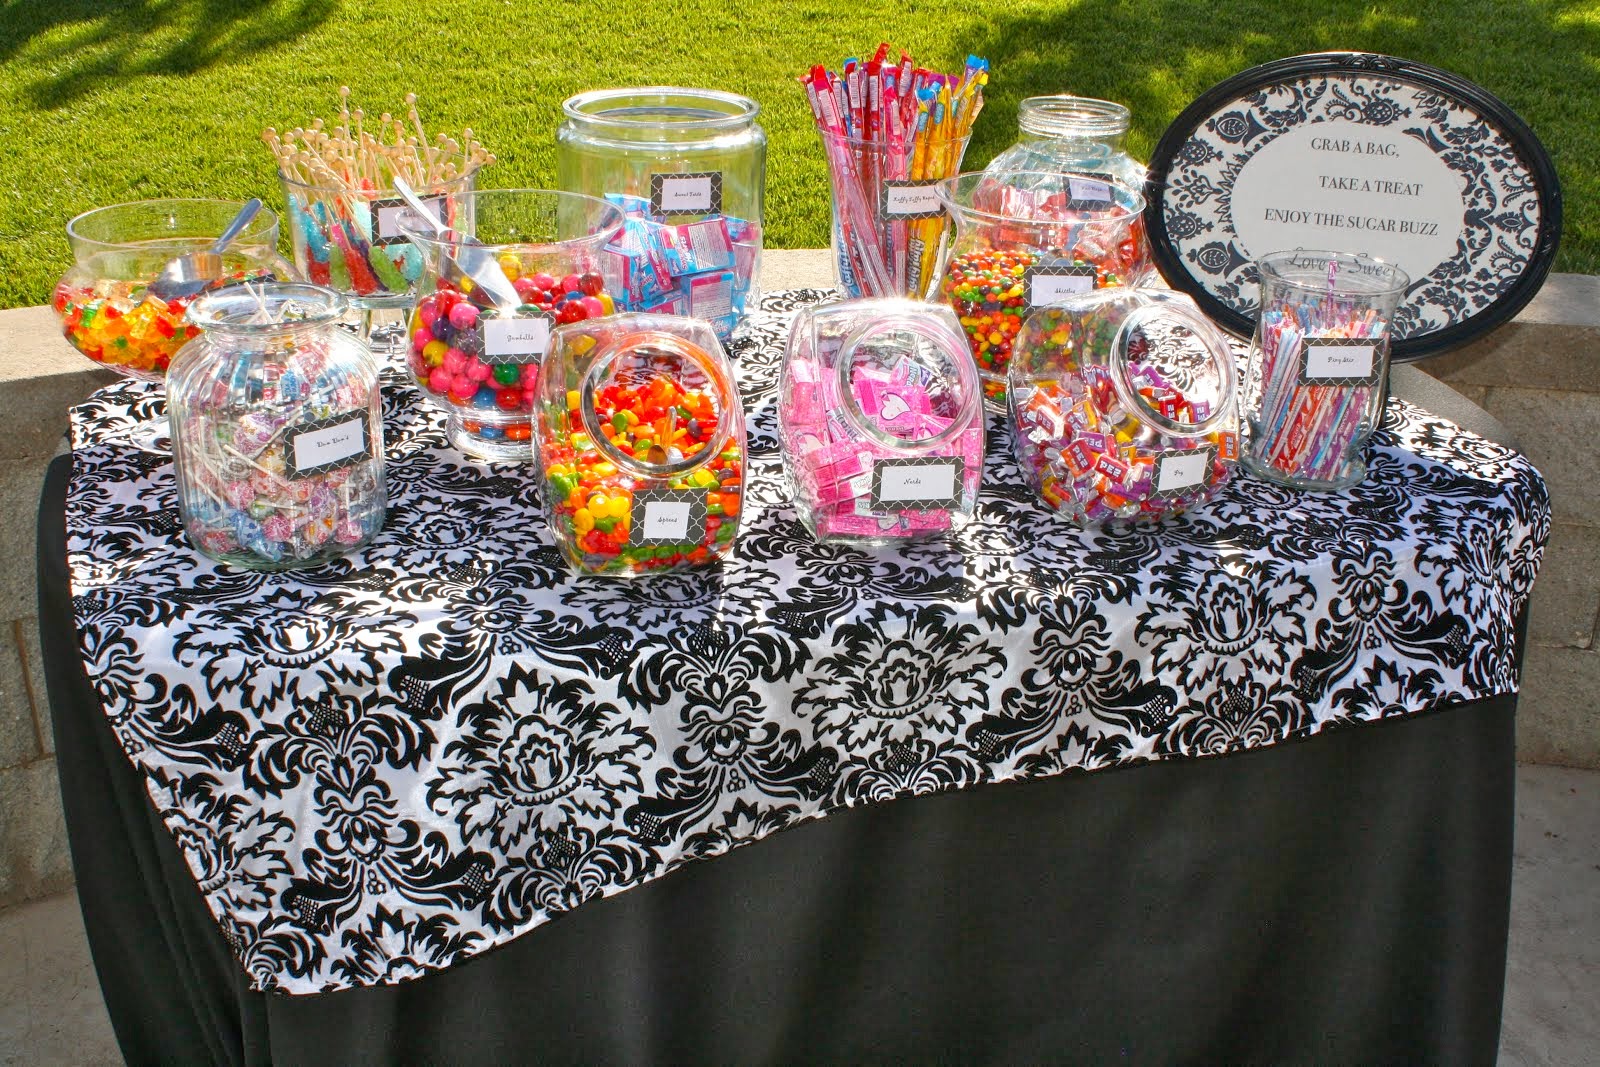 Ask us about coordinating a candy buffet for you!